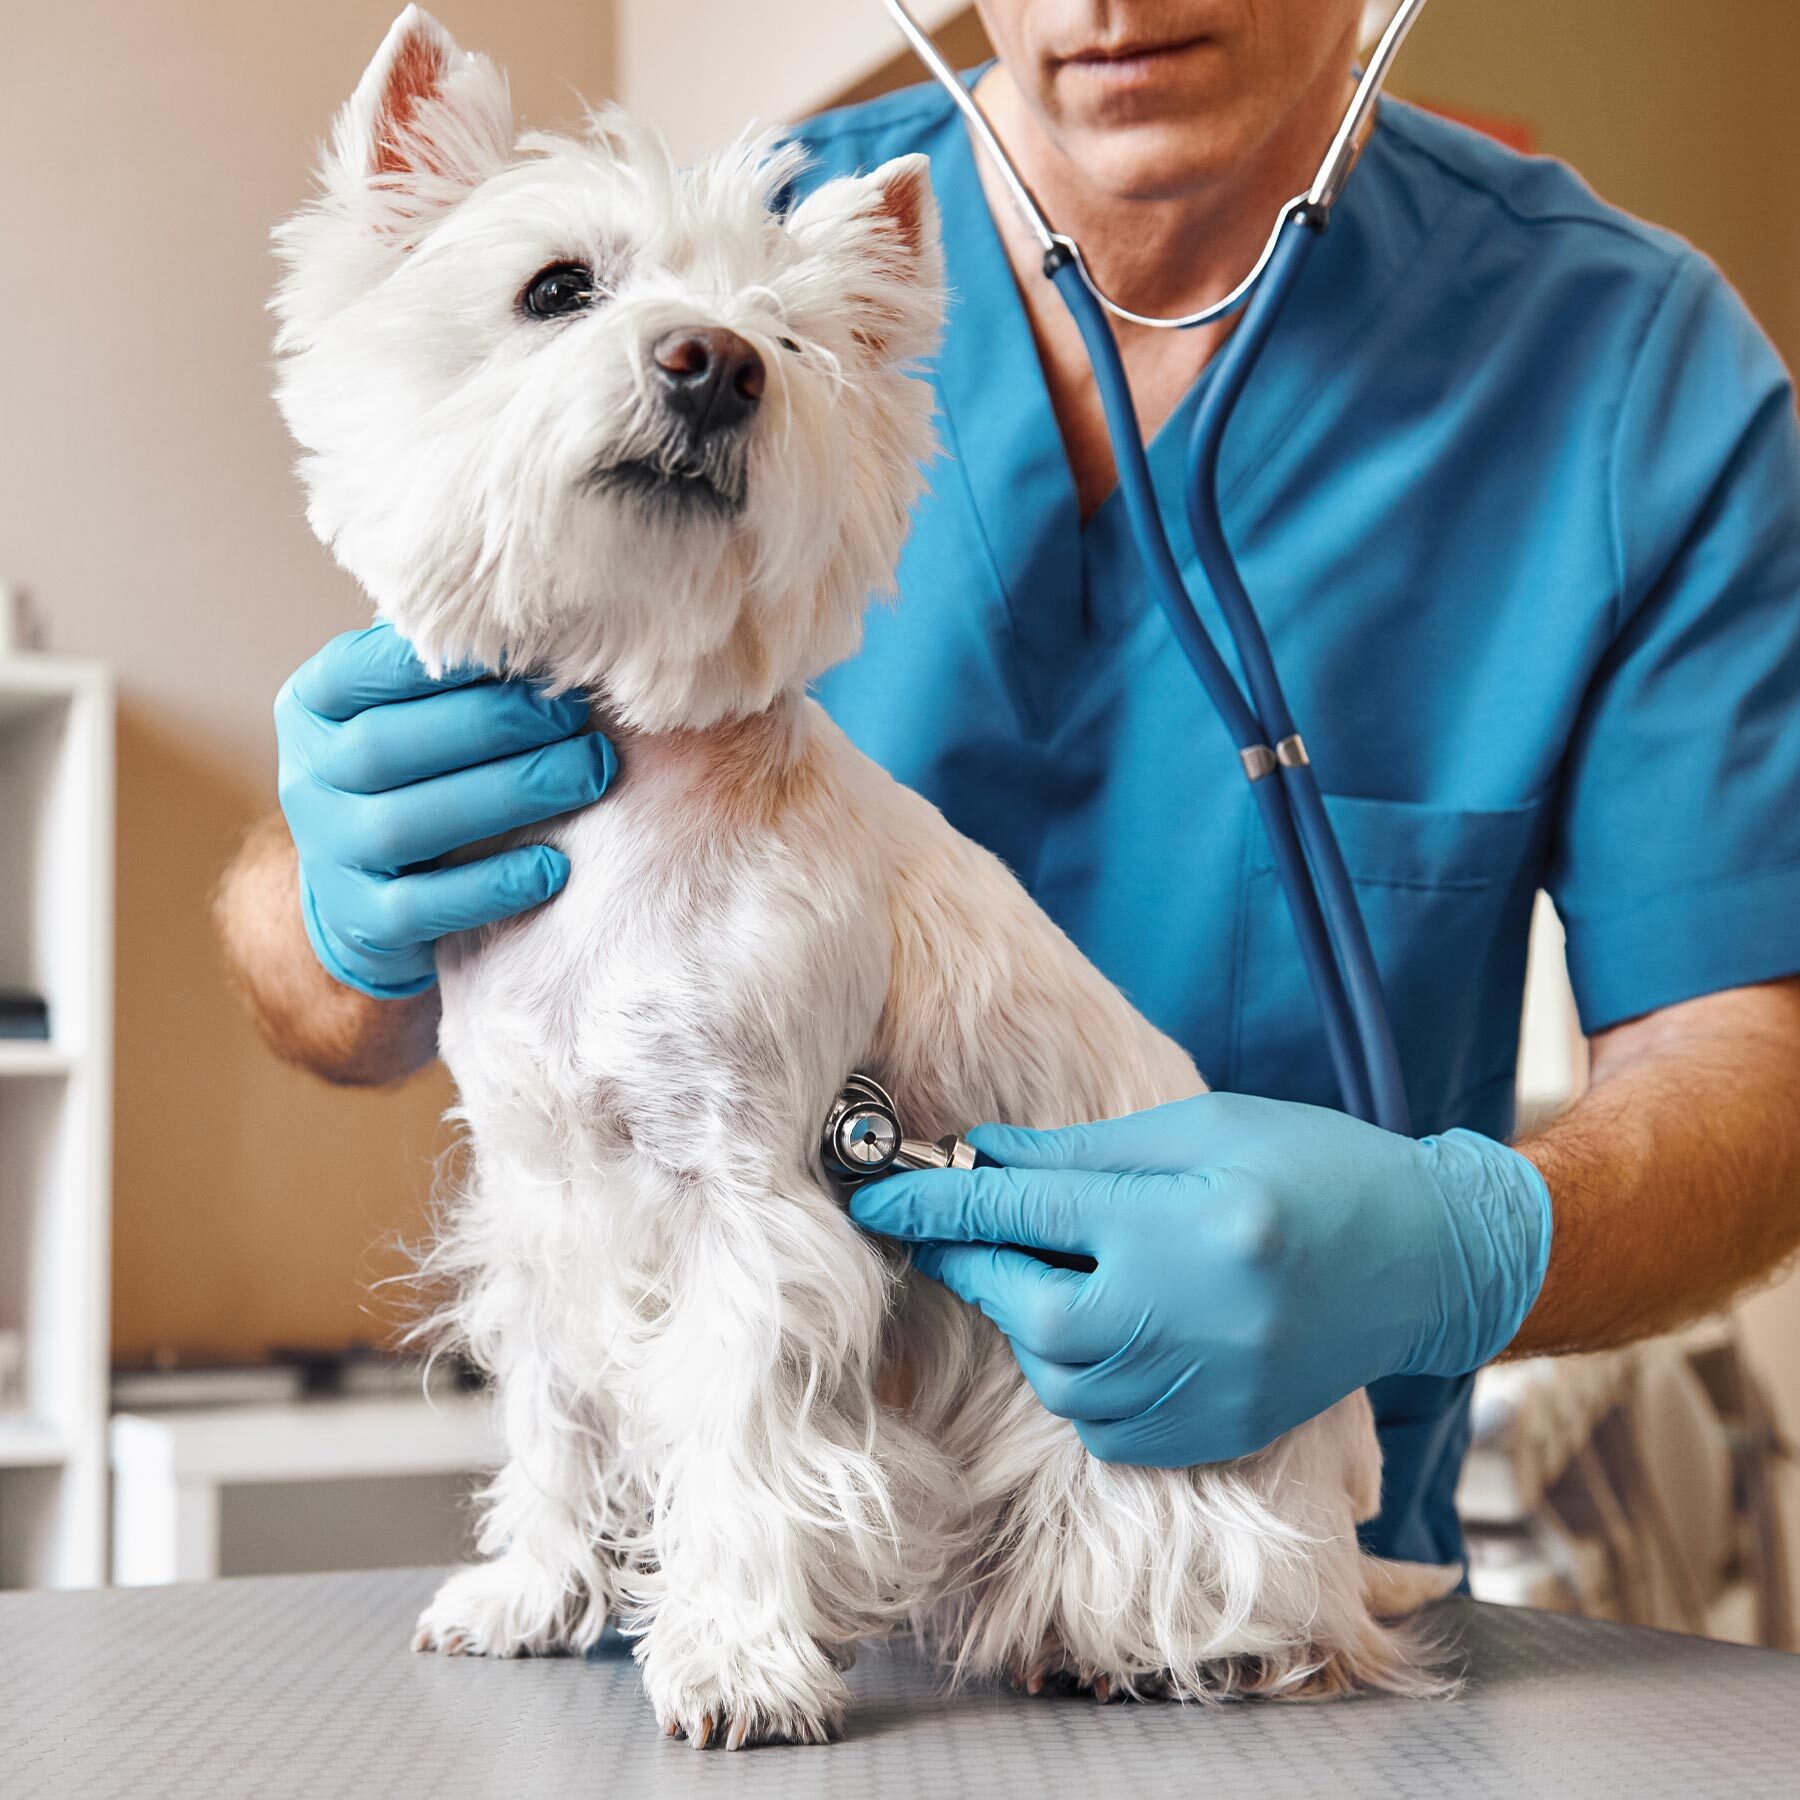 Doctor Checking Dogs Heart